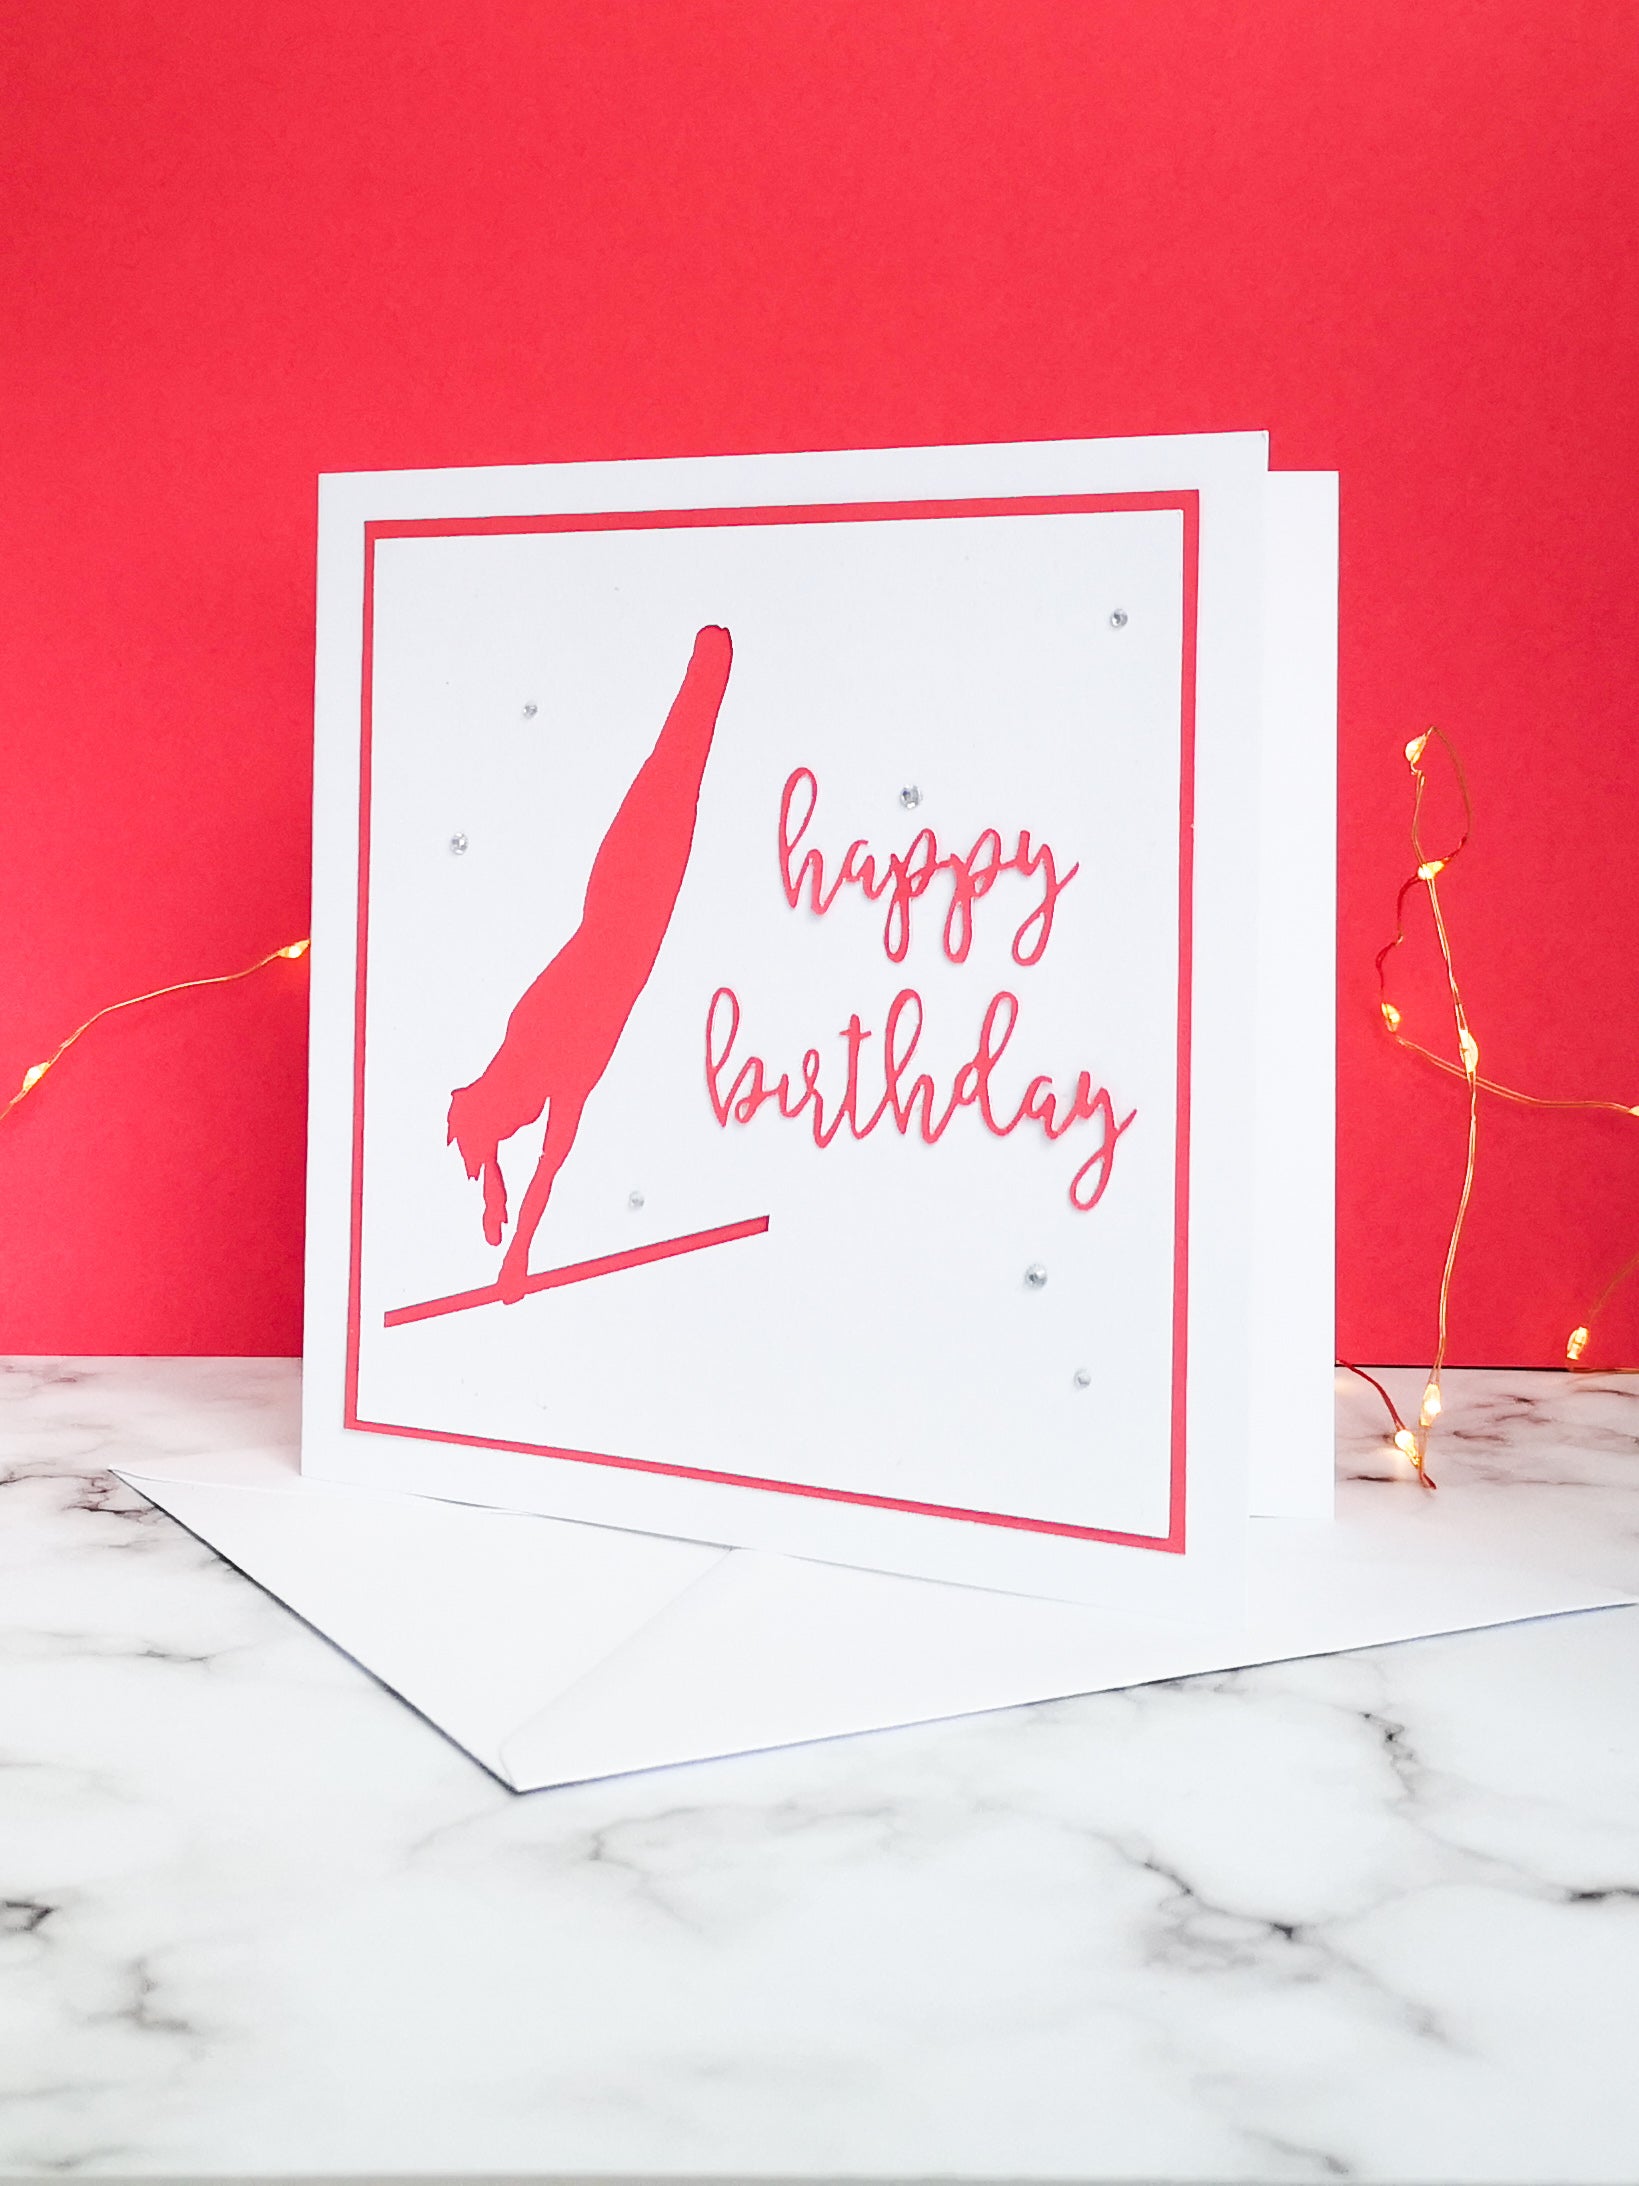 Blind Turn | Handmade Large Square Silhouette Birthday Card | The Bright Edition